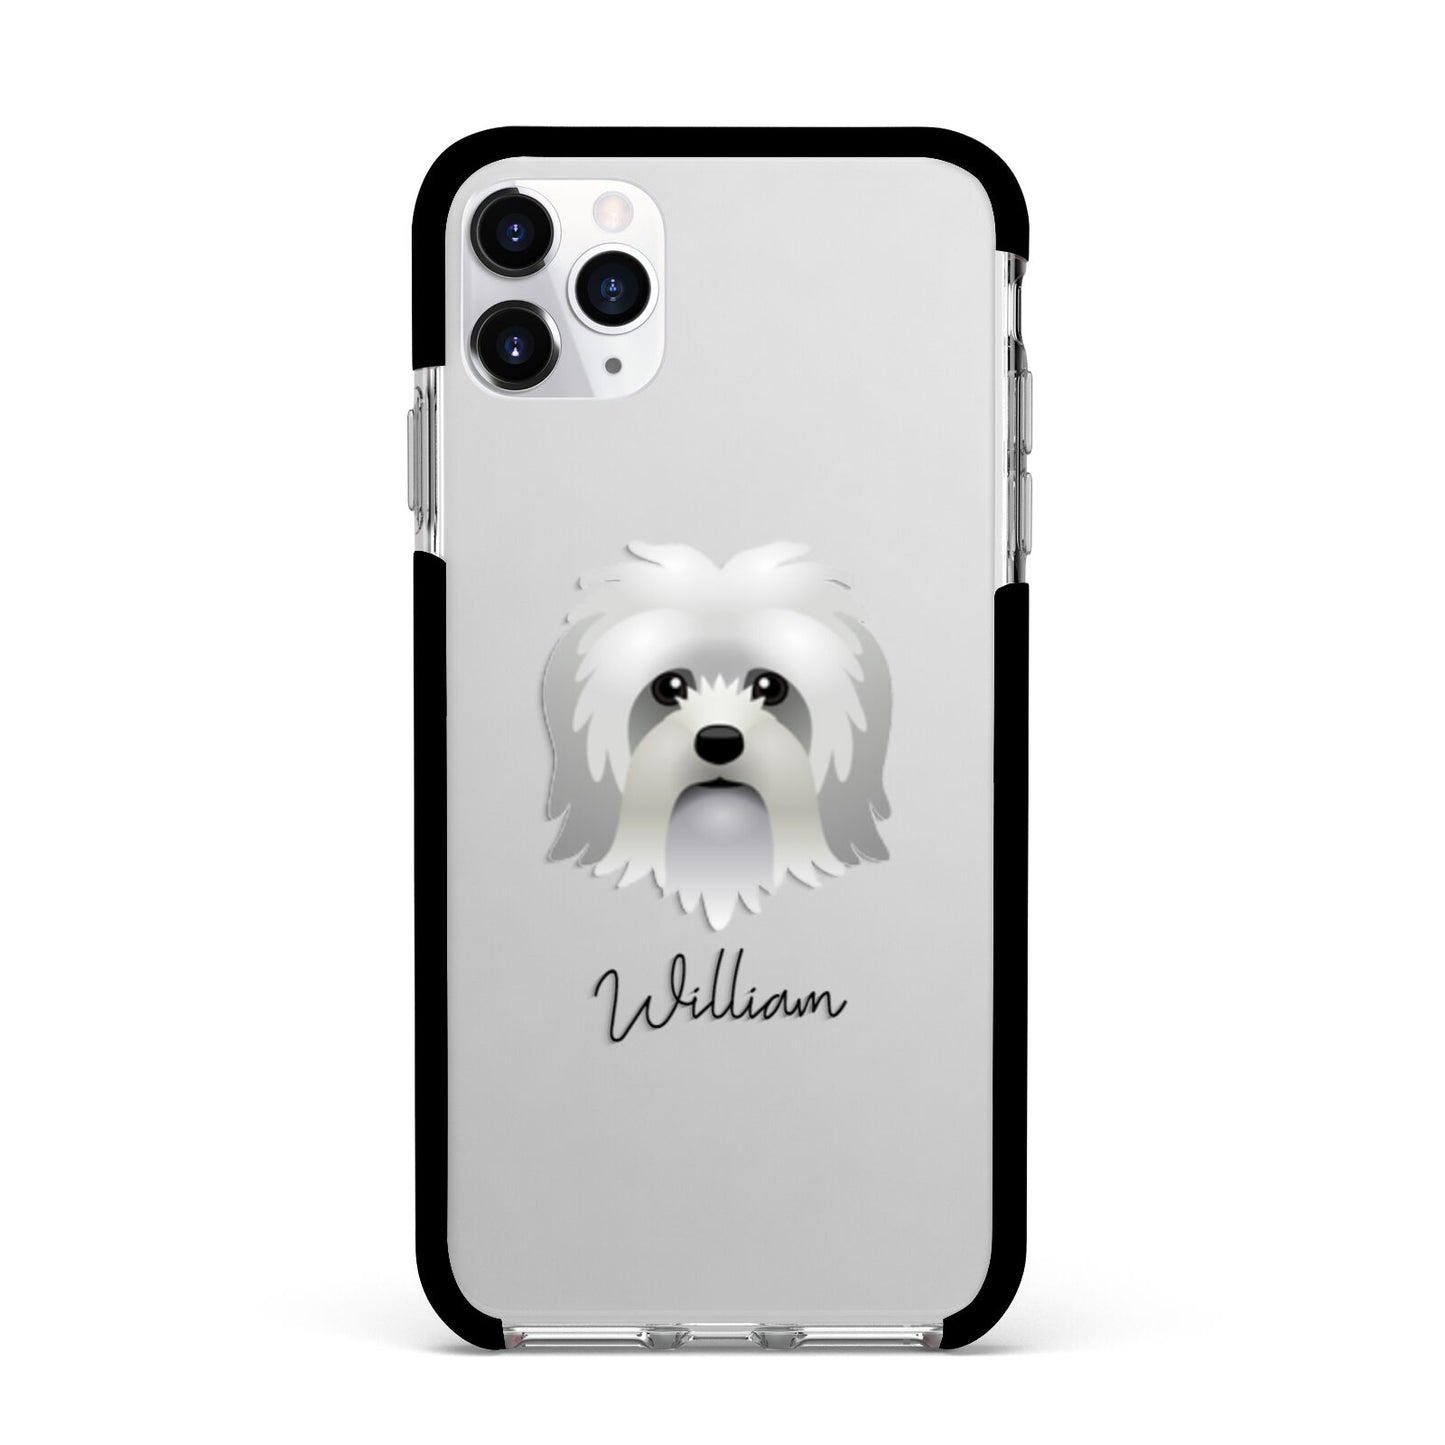 Lo wchen Personalised Apple iPhone 11 Pro Max in Silver with Black Impact Case